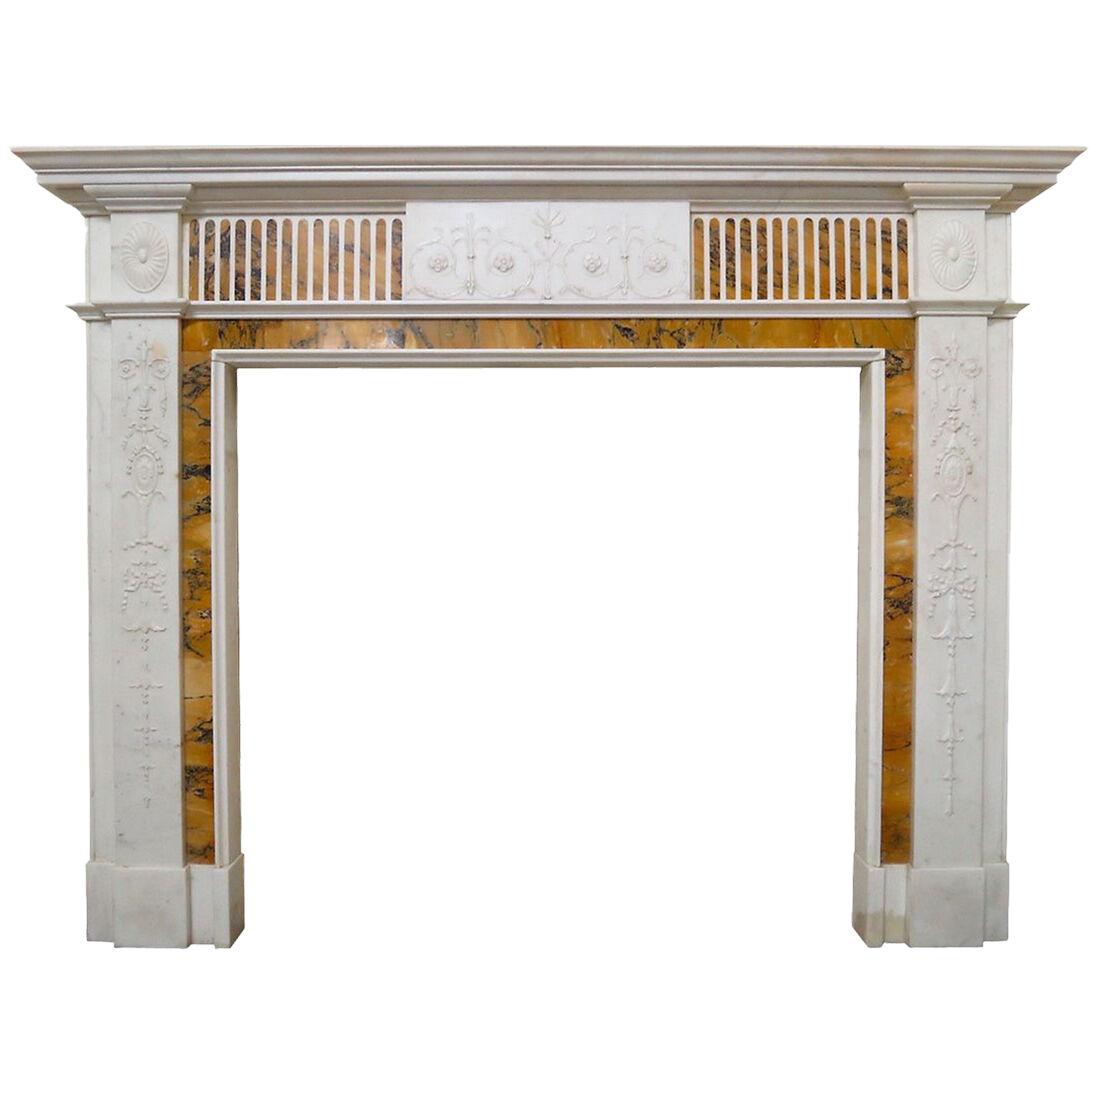 19th Century Statuary White and Sienna Marble Neoclassical Fireplace Mantel